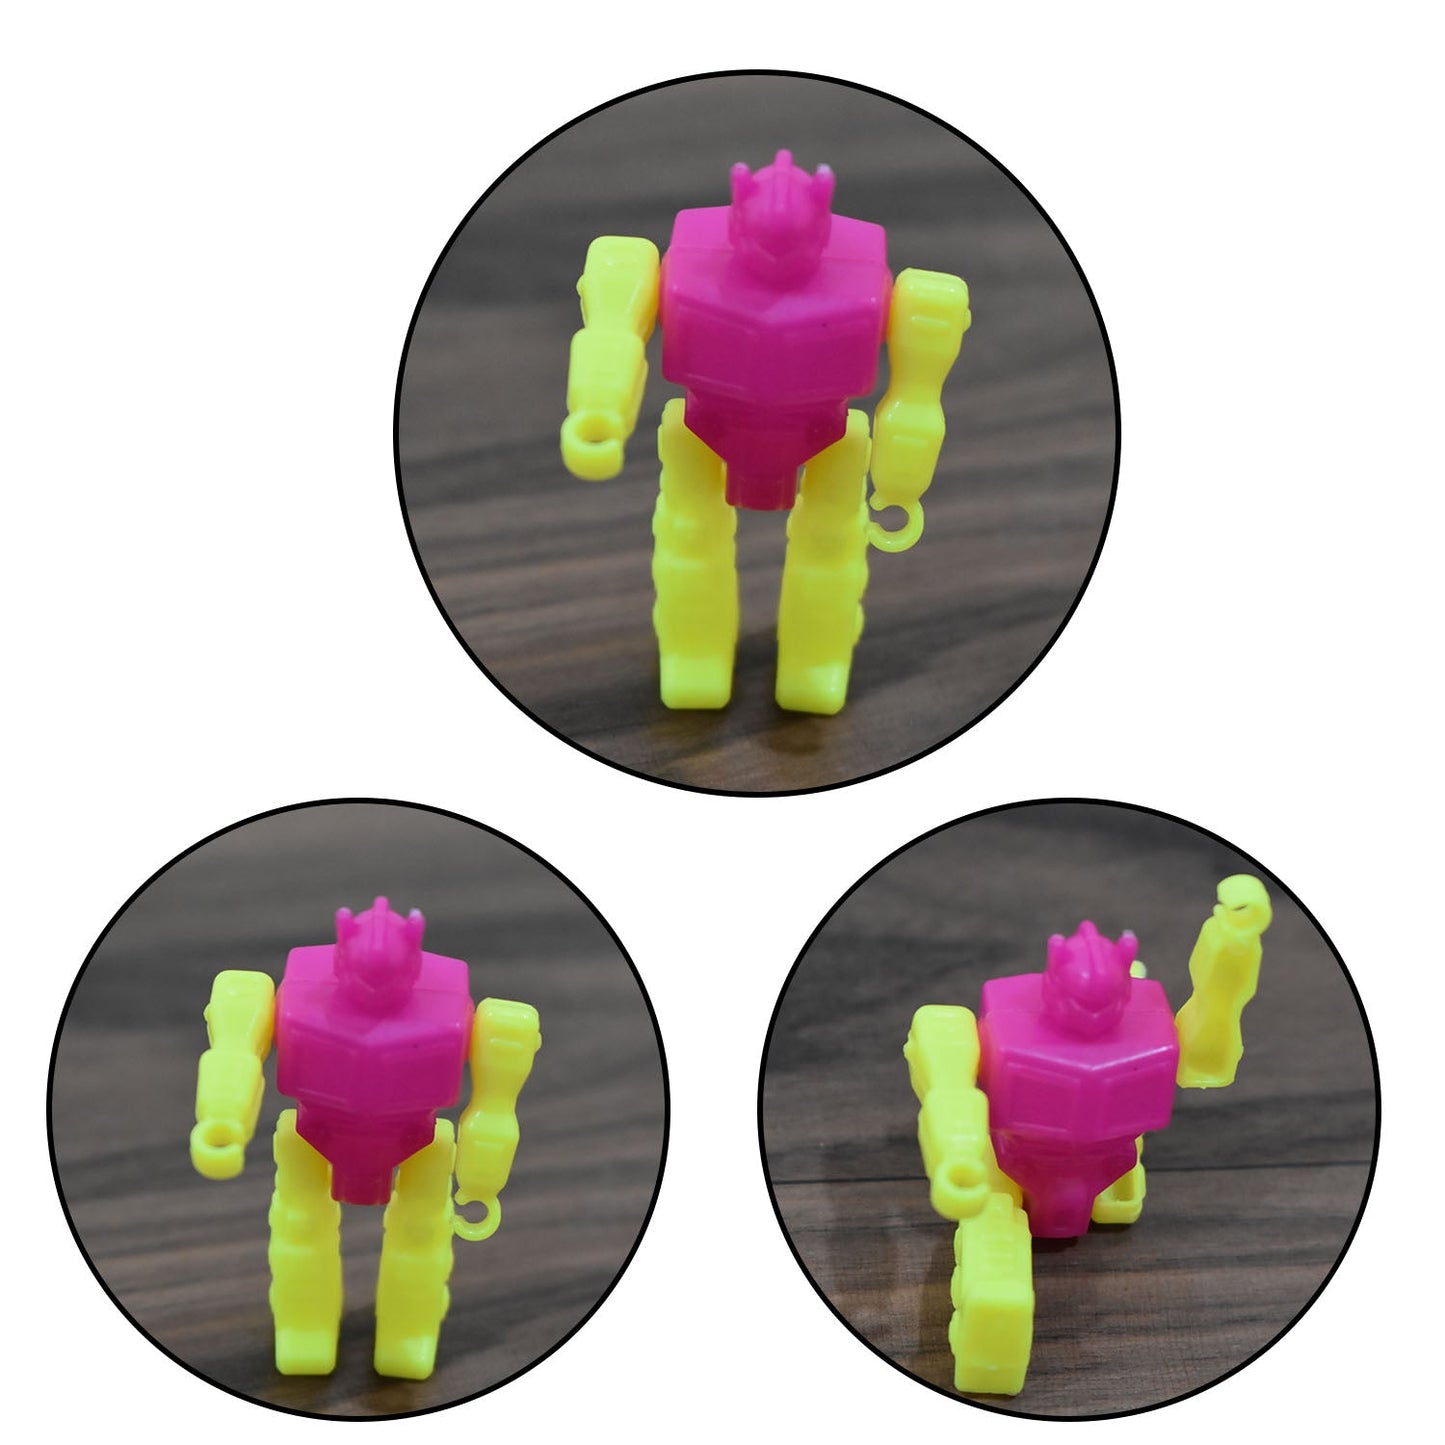 Small Robot Toy